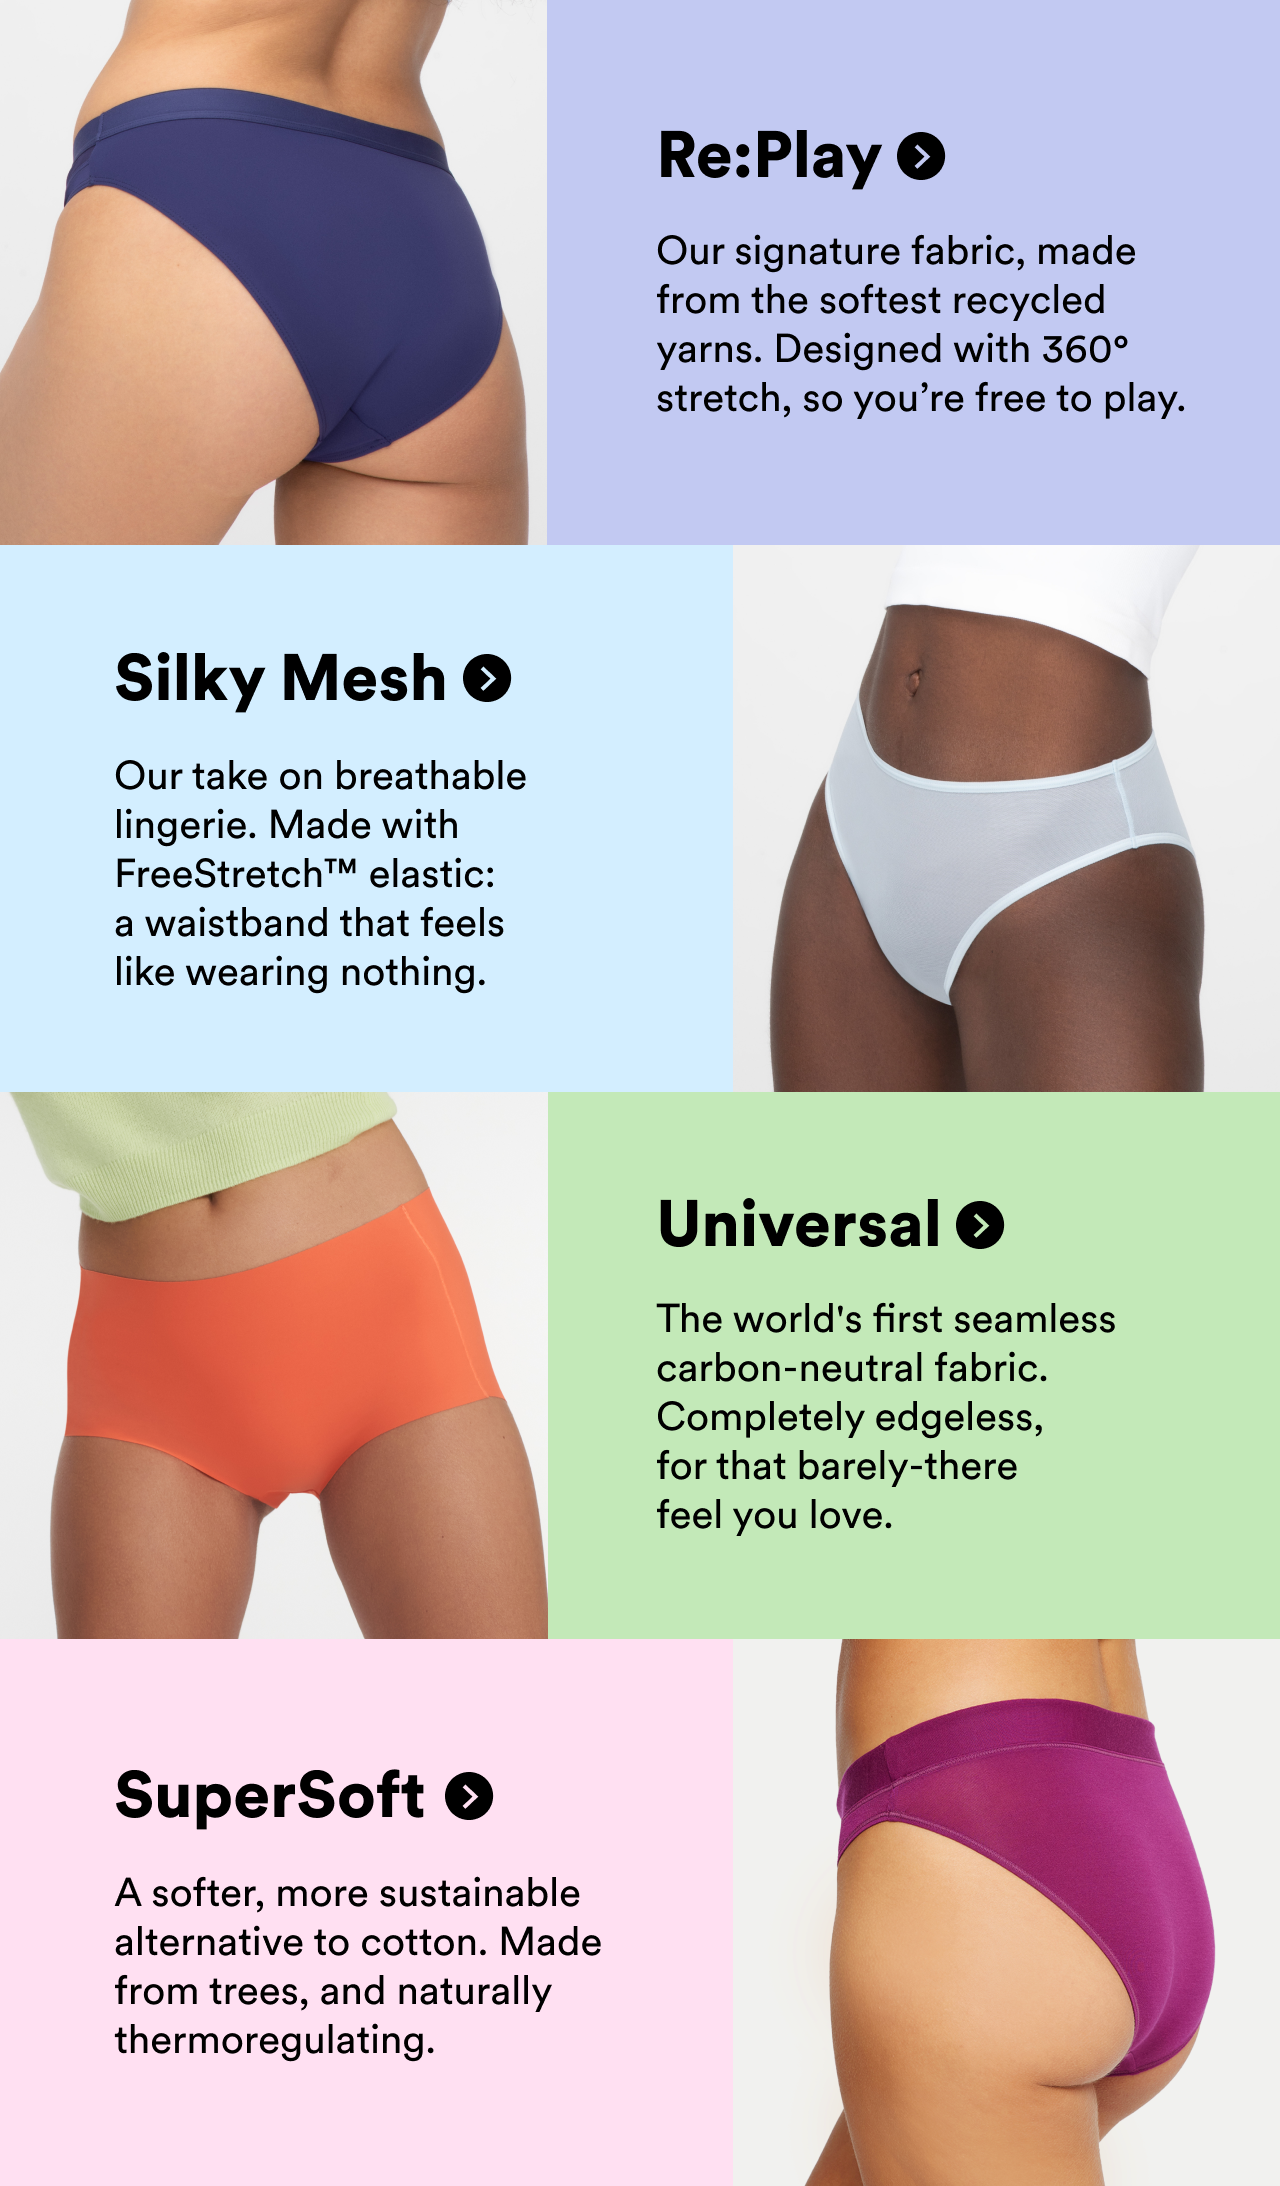 Parade Universal Means Edgeless Sustainable Undies for All